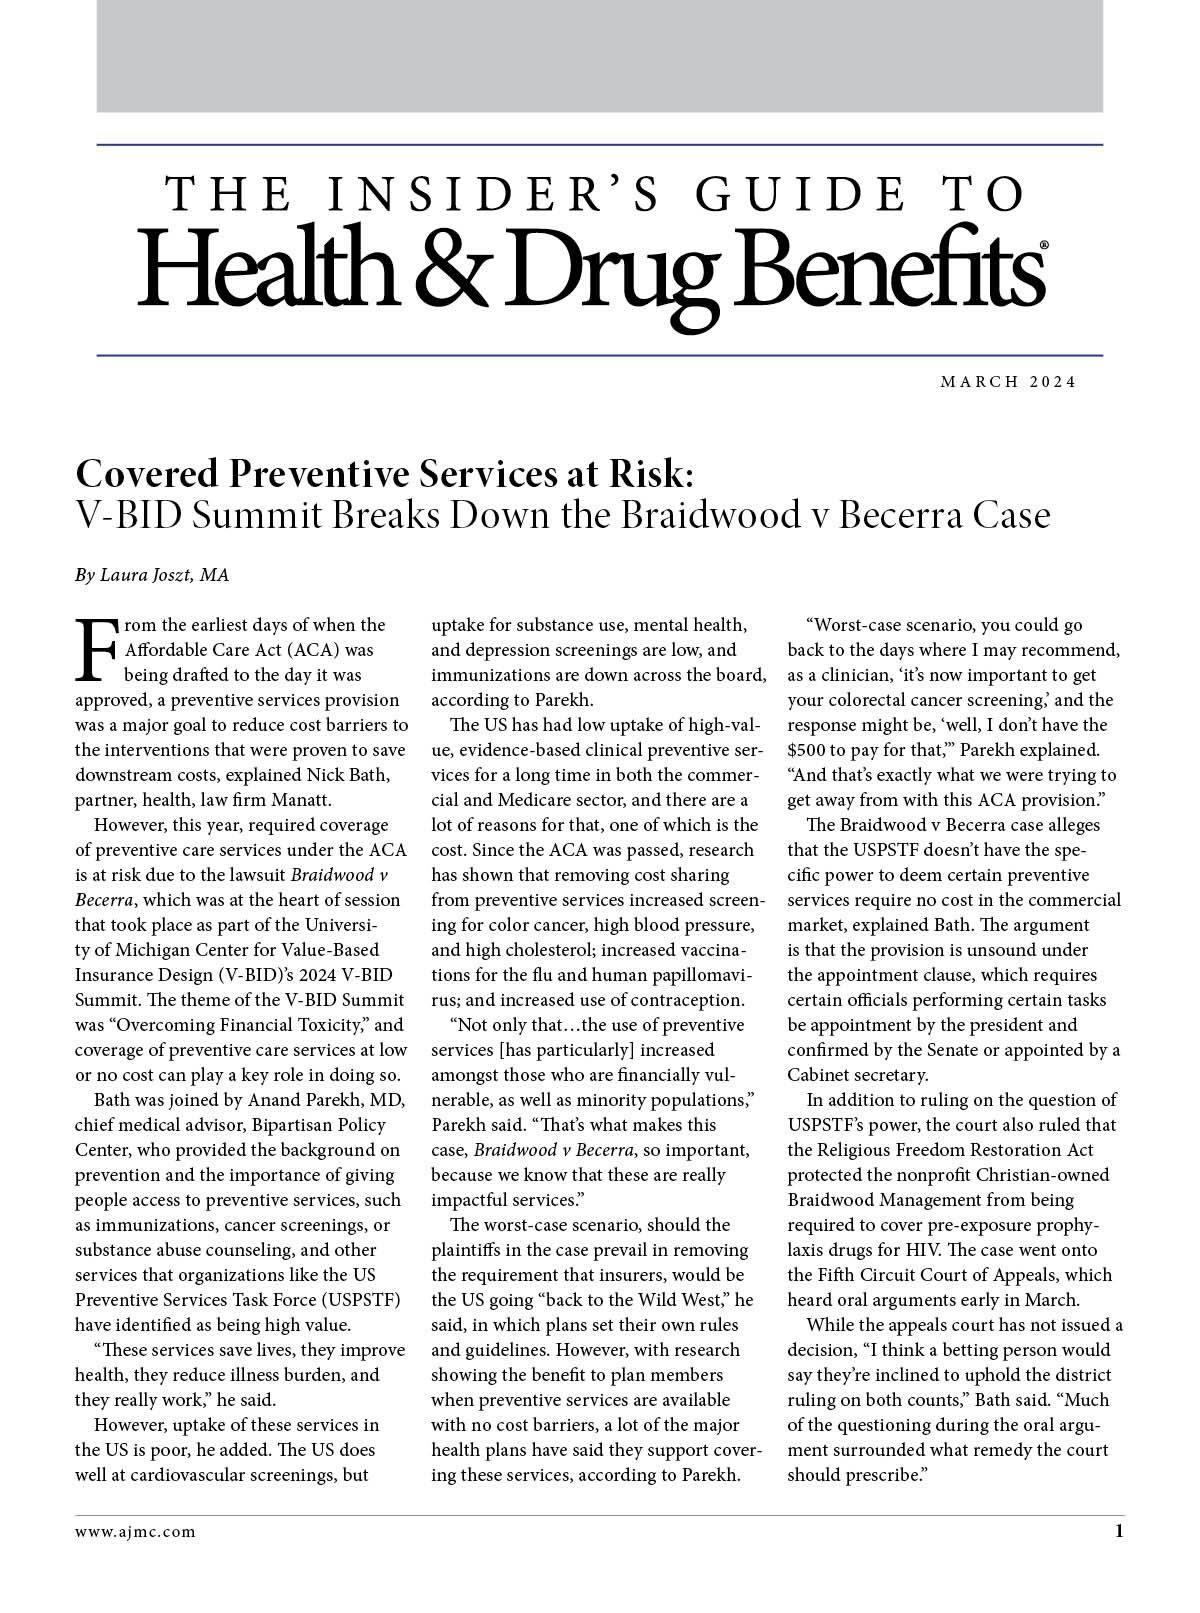 The Insider's Guide to Health & Drug Benefits® - March 2024